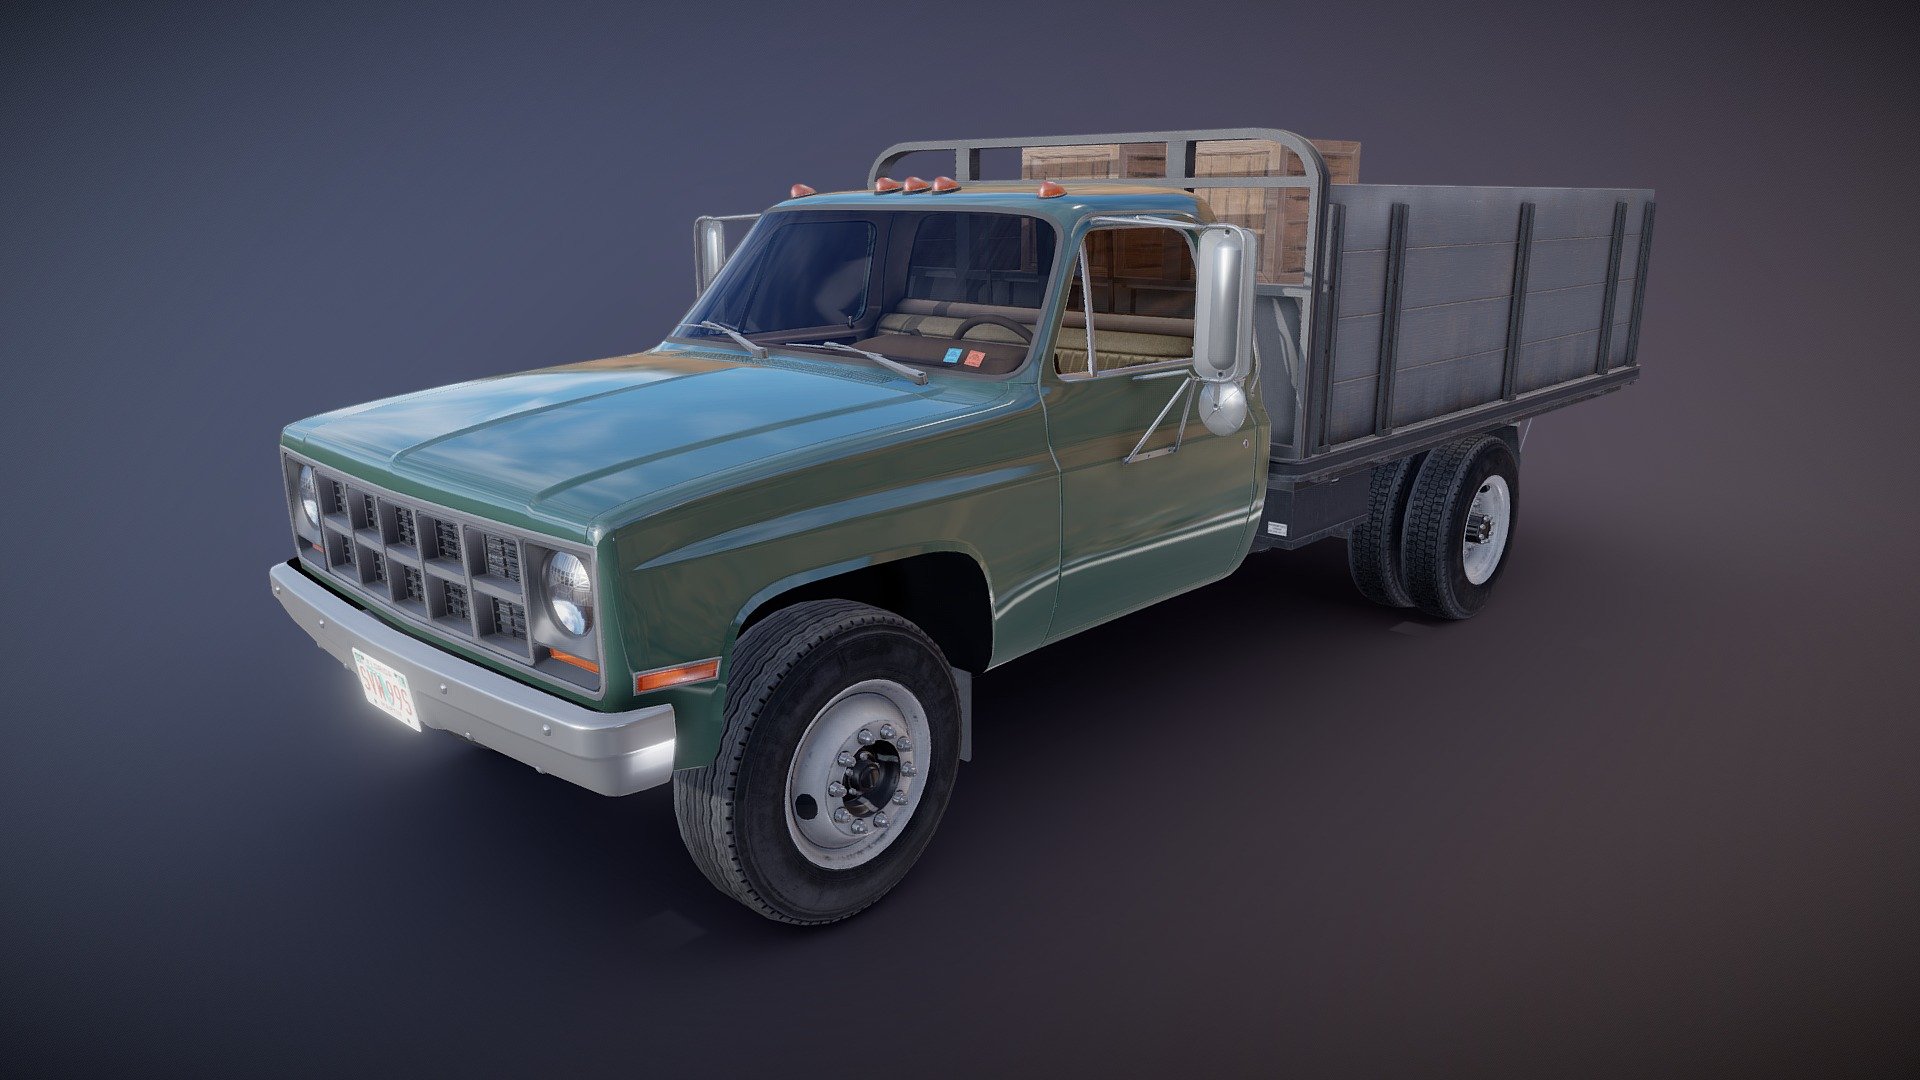 Farmer truck game ready model.

Full textured model with clean topology.

High accuracy exterior model.

Different tires for rear and front wheels.

High detailed cabin - seams, chrome parts, wipers, mud flaps and etc.

High detailed rear suspension with axles and other parts.

Two variants of cargo - big boxes in covers and small wood boxes.

Two textures for interior - black and brown.

Lowpoly interior - 2855 tris 1652 verts

Wheels - 10254 tris 6132 verts

Full model - 47196 tris 28137 verts.

High detailed rims and tires, with PBR maps(Base_Color/Metallic/Normal/Roughness.png2048x2048 )

Original scale.

Lenght 5.6m , width 1.9m , height 2.1m.

Model ready for real-time apps, games, virtual reality and augmented reality.

Asset looks accuracy and realistic and become a good part of your project 3d model